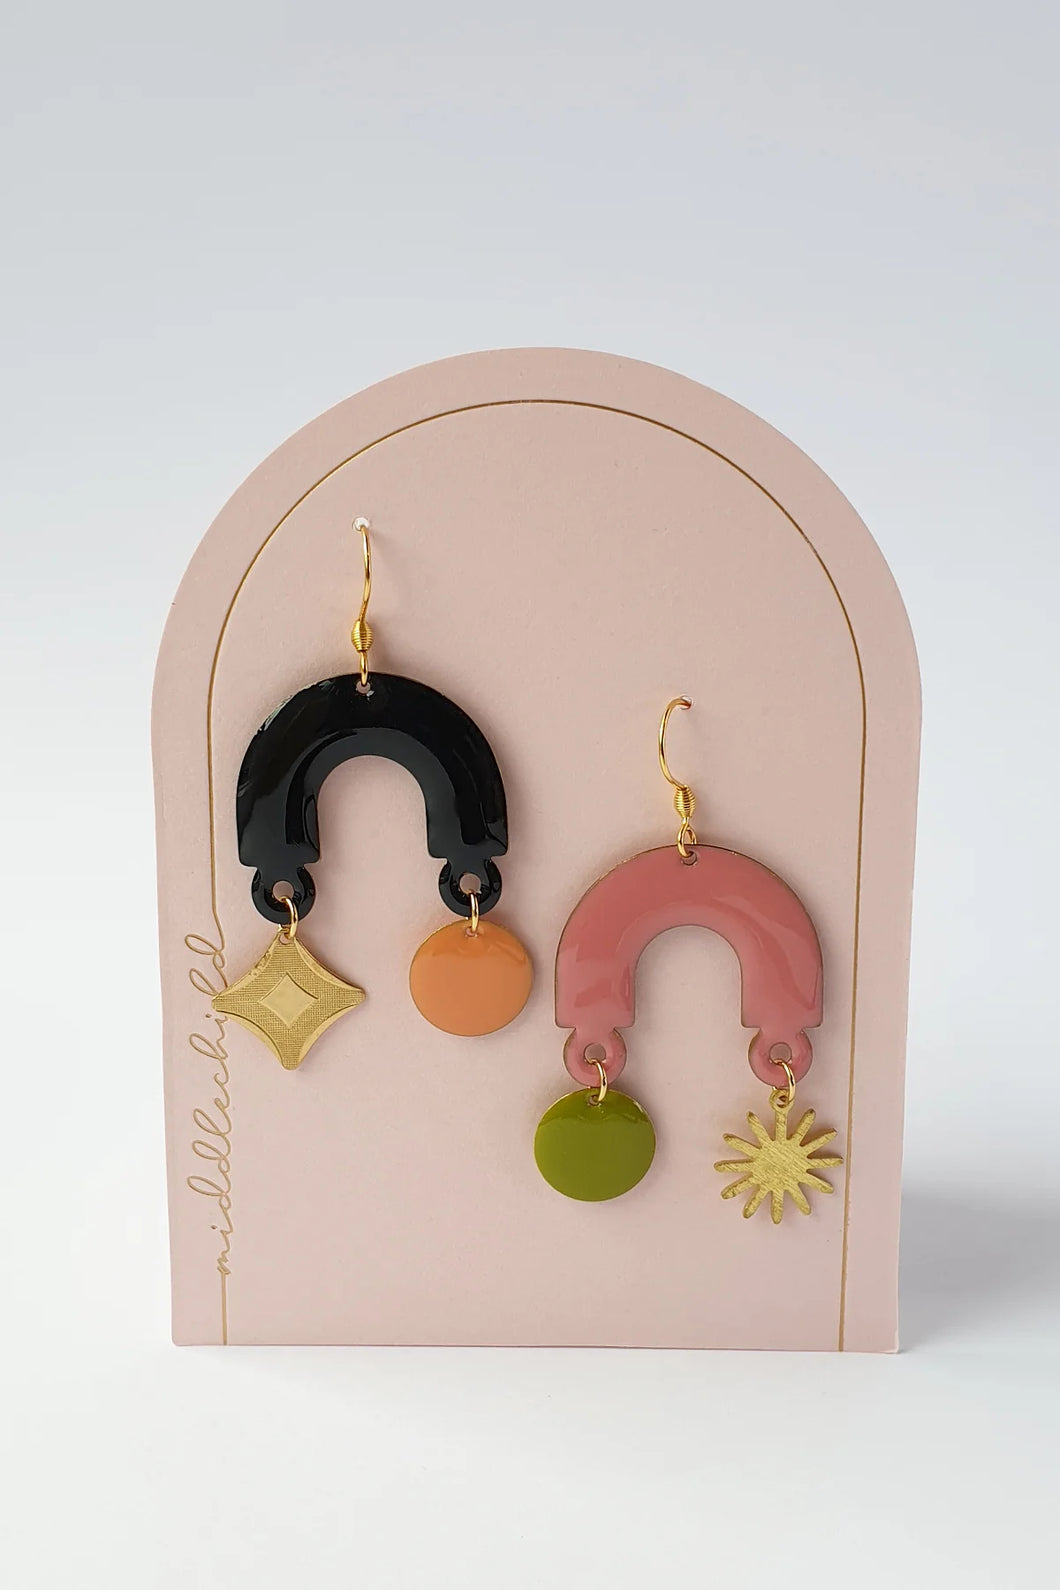 Middle Child Earrings - Confection - Black/Pink - MC0723-011